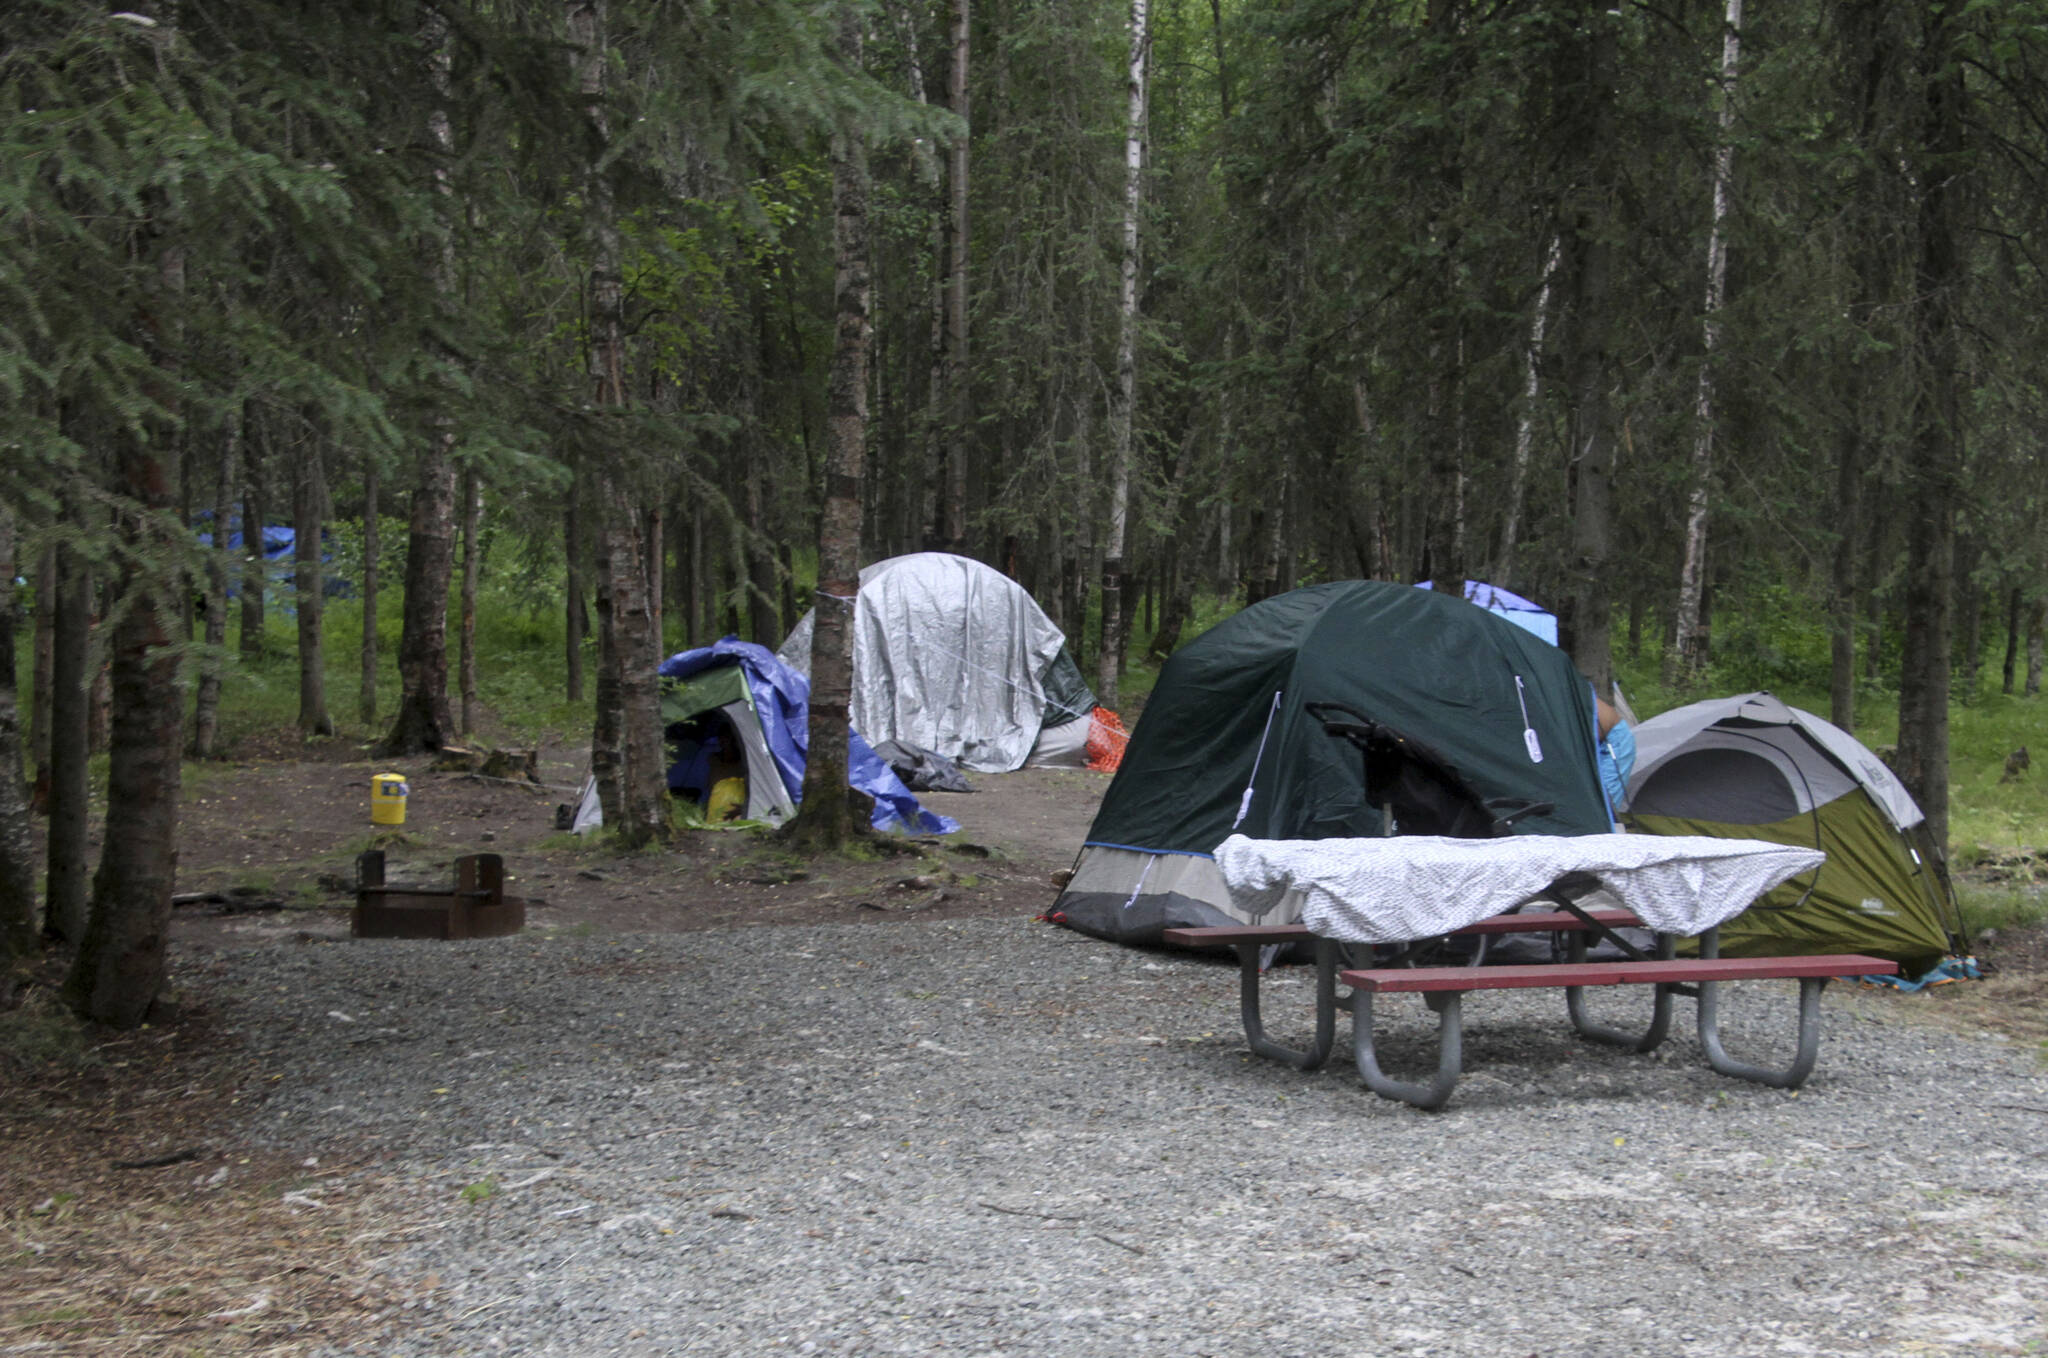 Tents are shown Wednesday, July 6, 2022, inside Centennial Park in Anchorage, Alaska. State wildlife officials have killed four black bears in a campground recently set aside for the city’s homeless population after Anchorage’s largest shelter was closed. (AP Photo/Mark Thiessen)